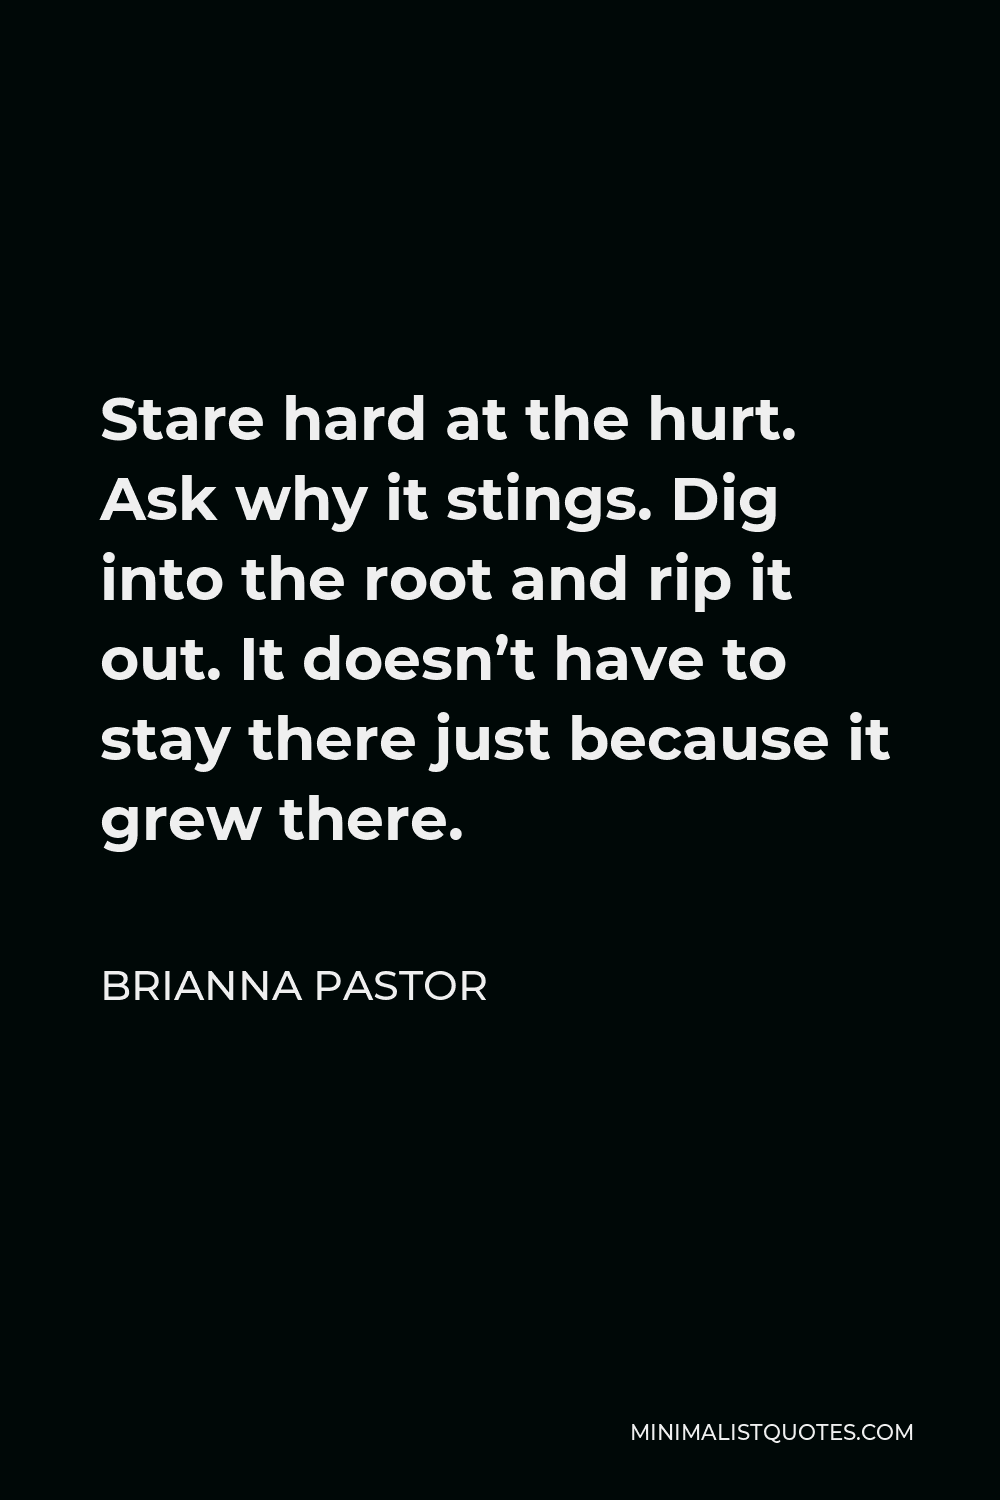 Brianna Pastor Quote - Stare hard at the hurt. Ask why it stings. Dig into the root and rip it out. It doesn’t have to stay there just because it grew there.